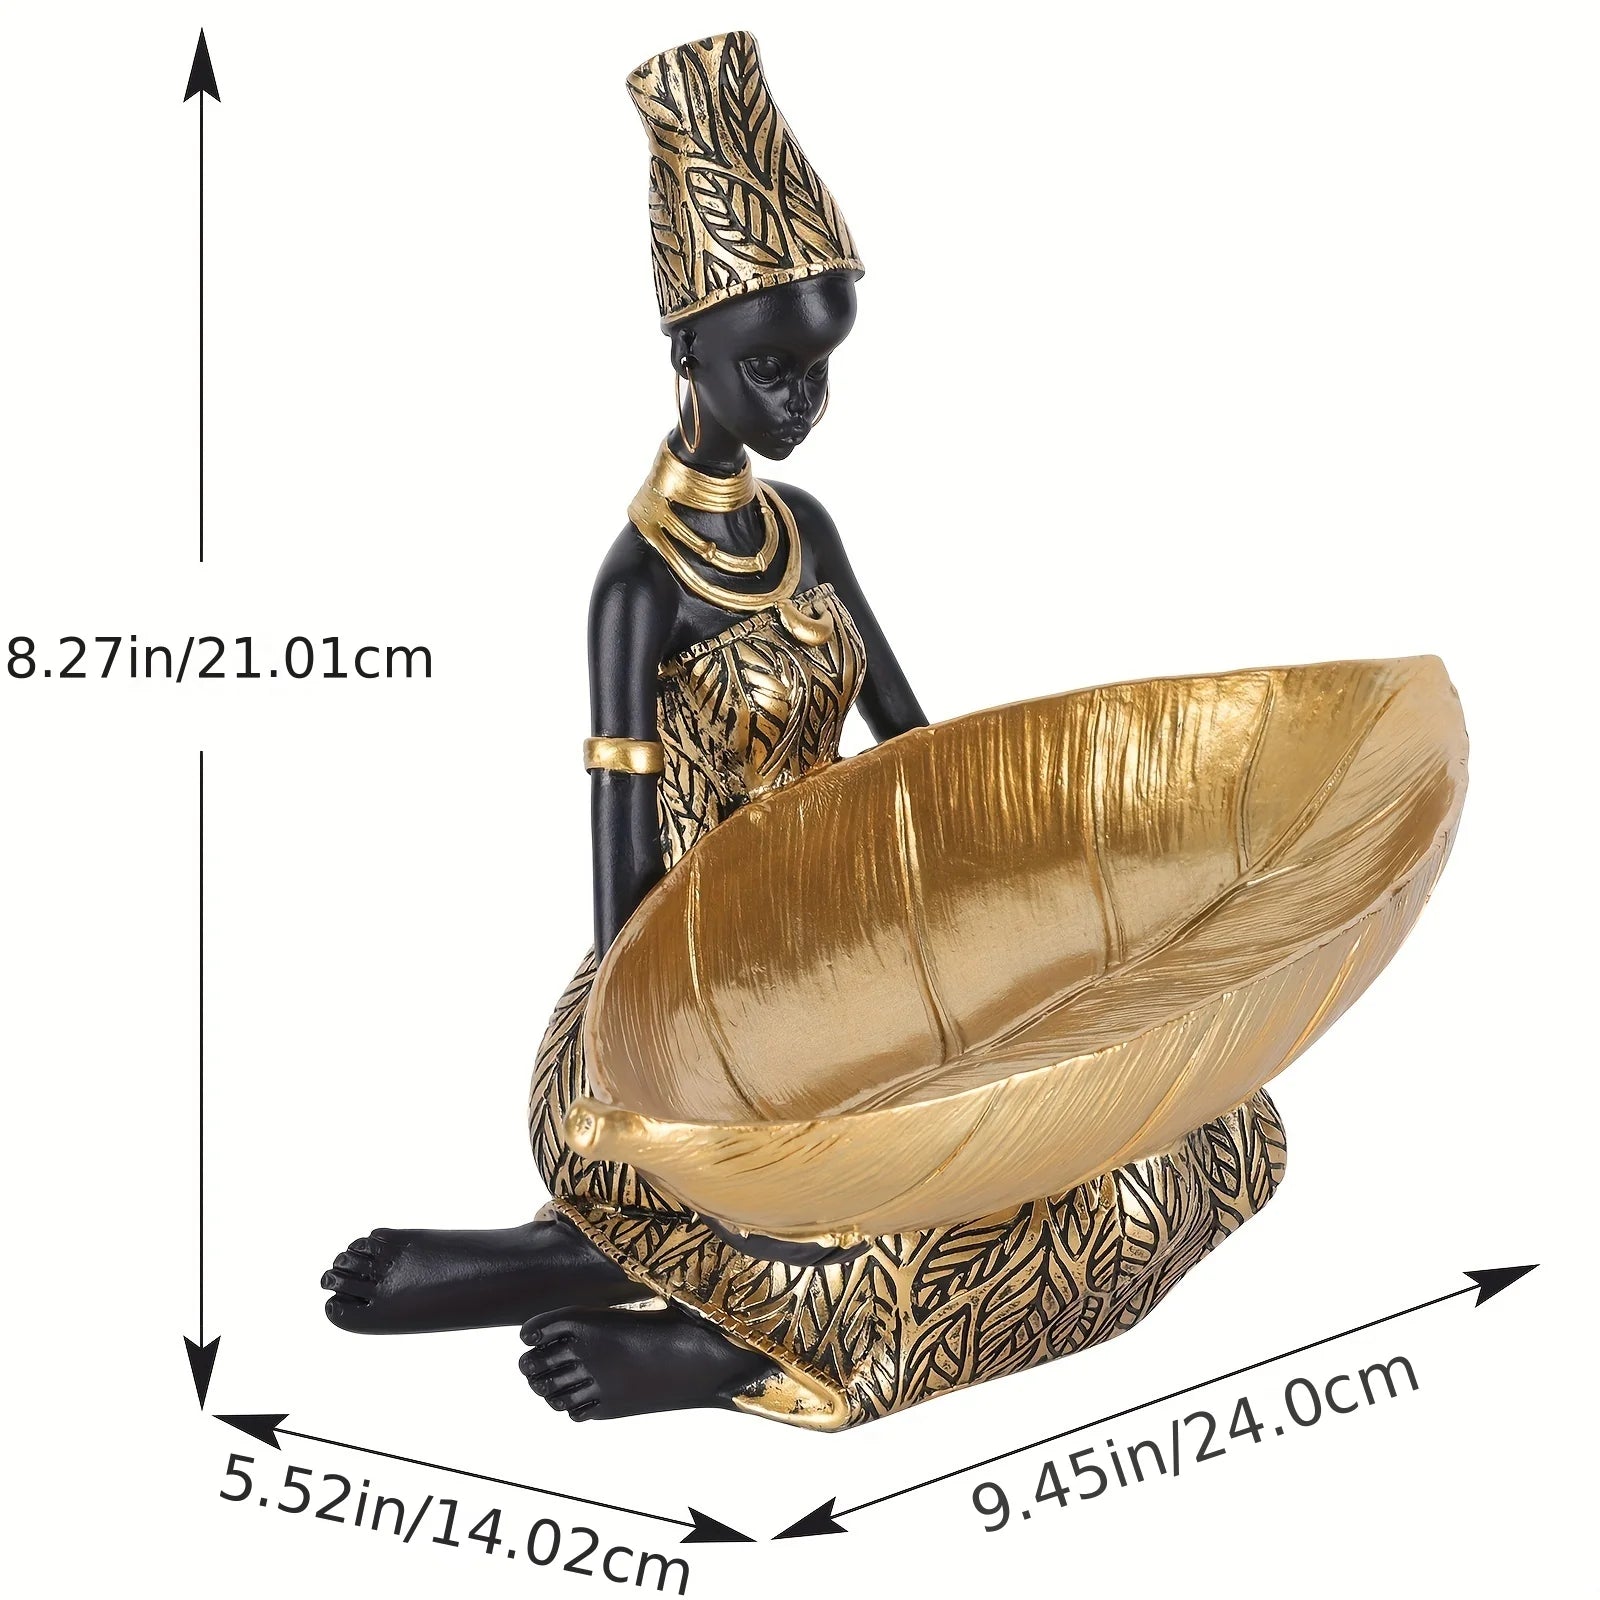 African Women Resin Statue - Home Decor, National Woman Decoration for Living Room, Tabletop Craft Tray Light Grey